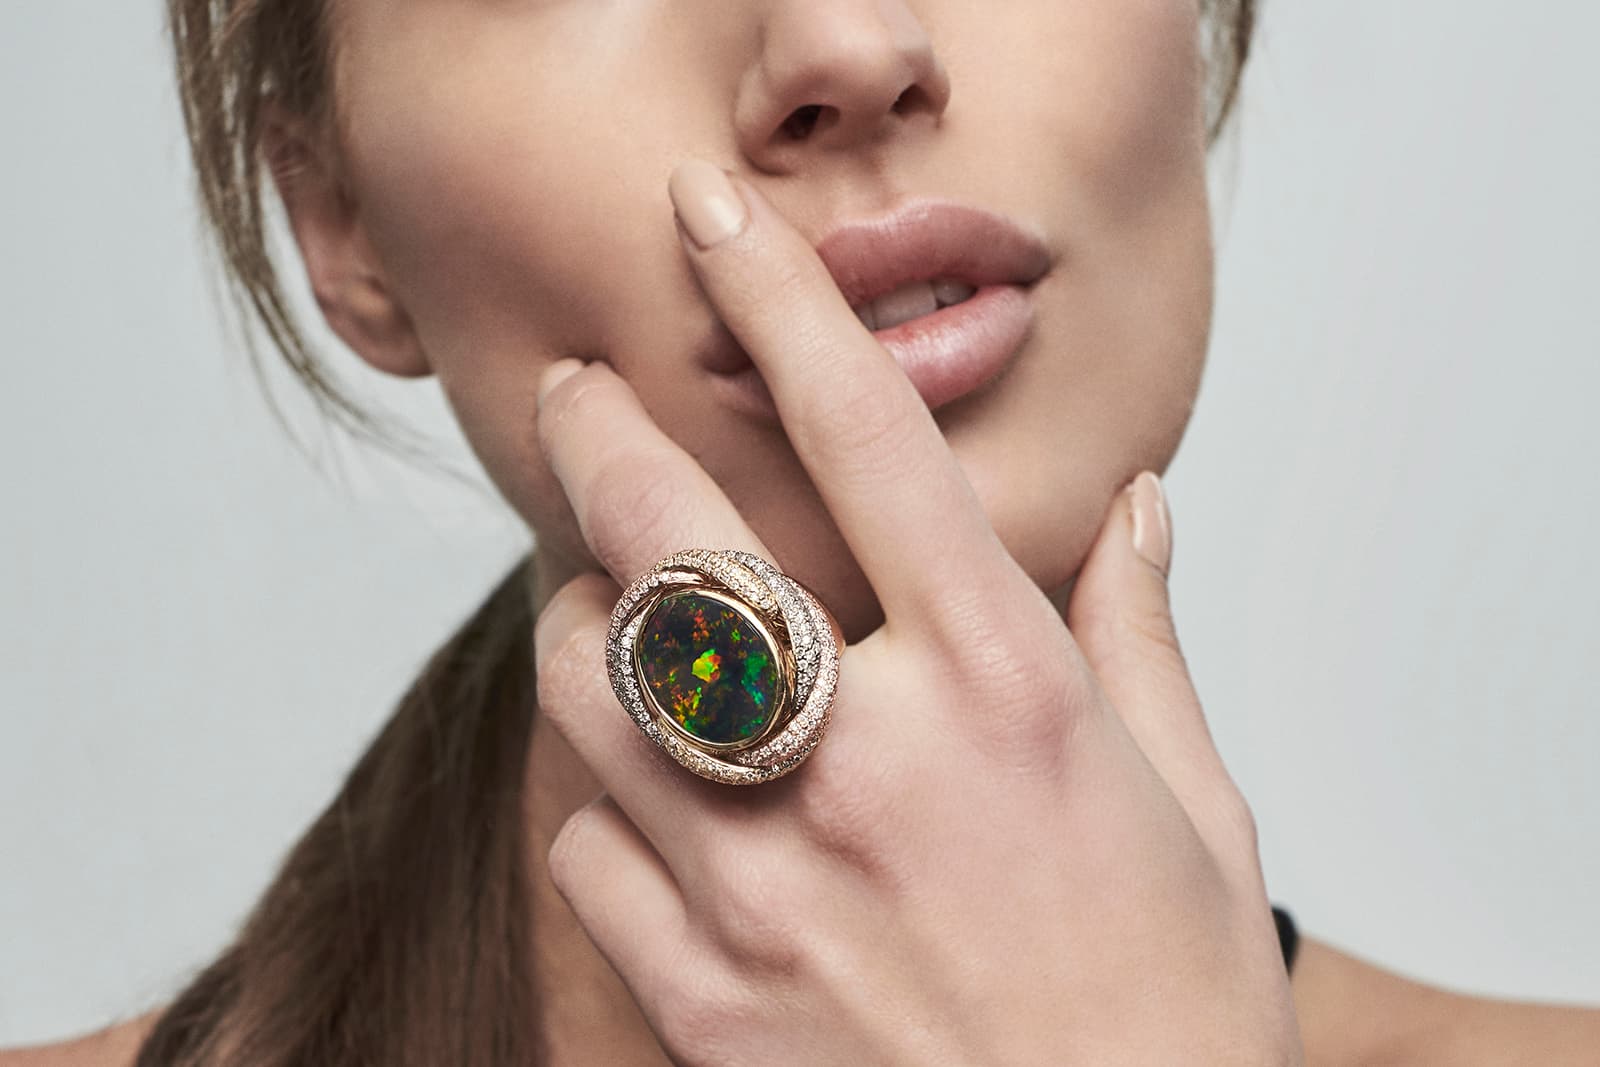 Opal Minded's spectacular Black Queen ring, set with an incomparable black opal discovered in Lightning Ridge